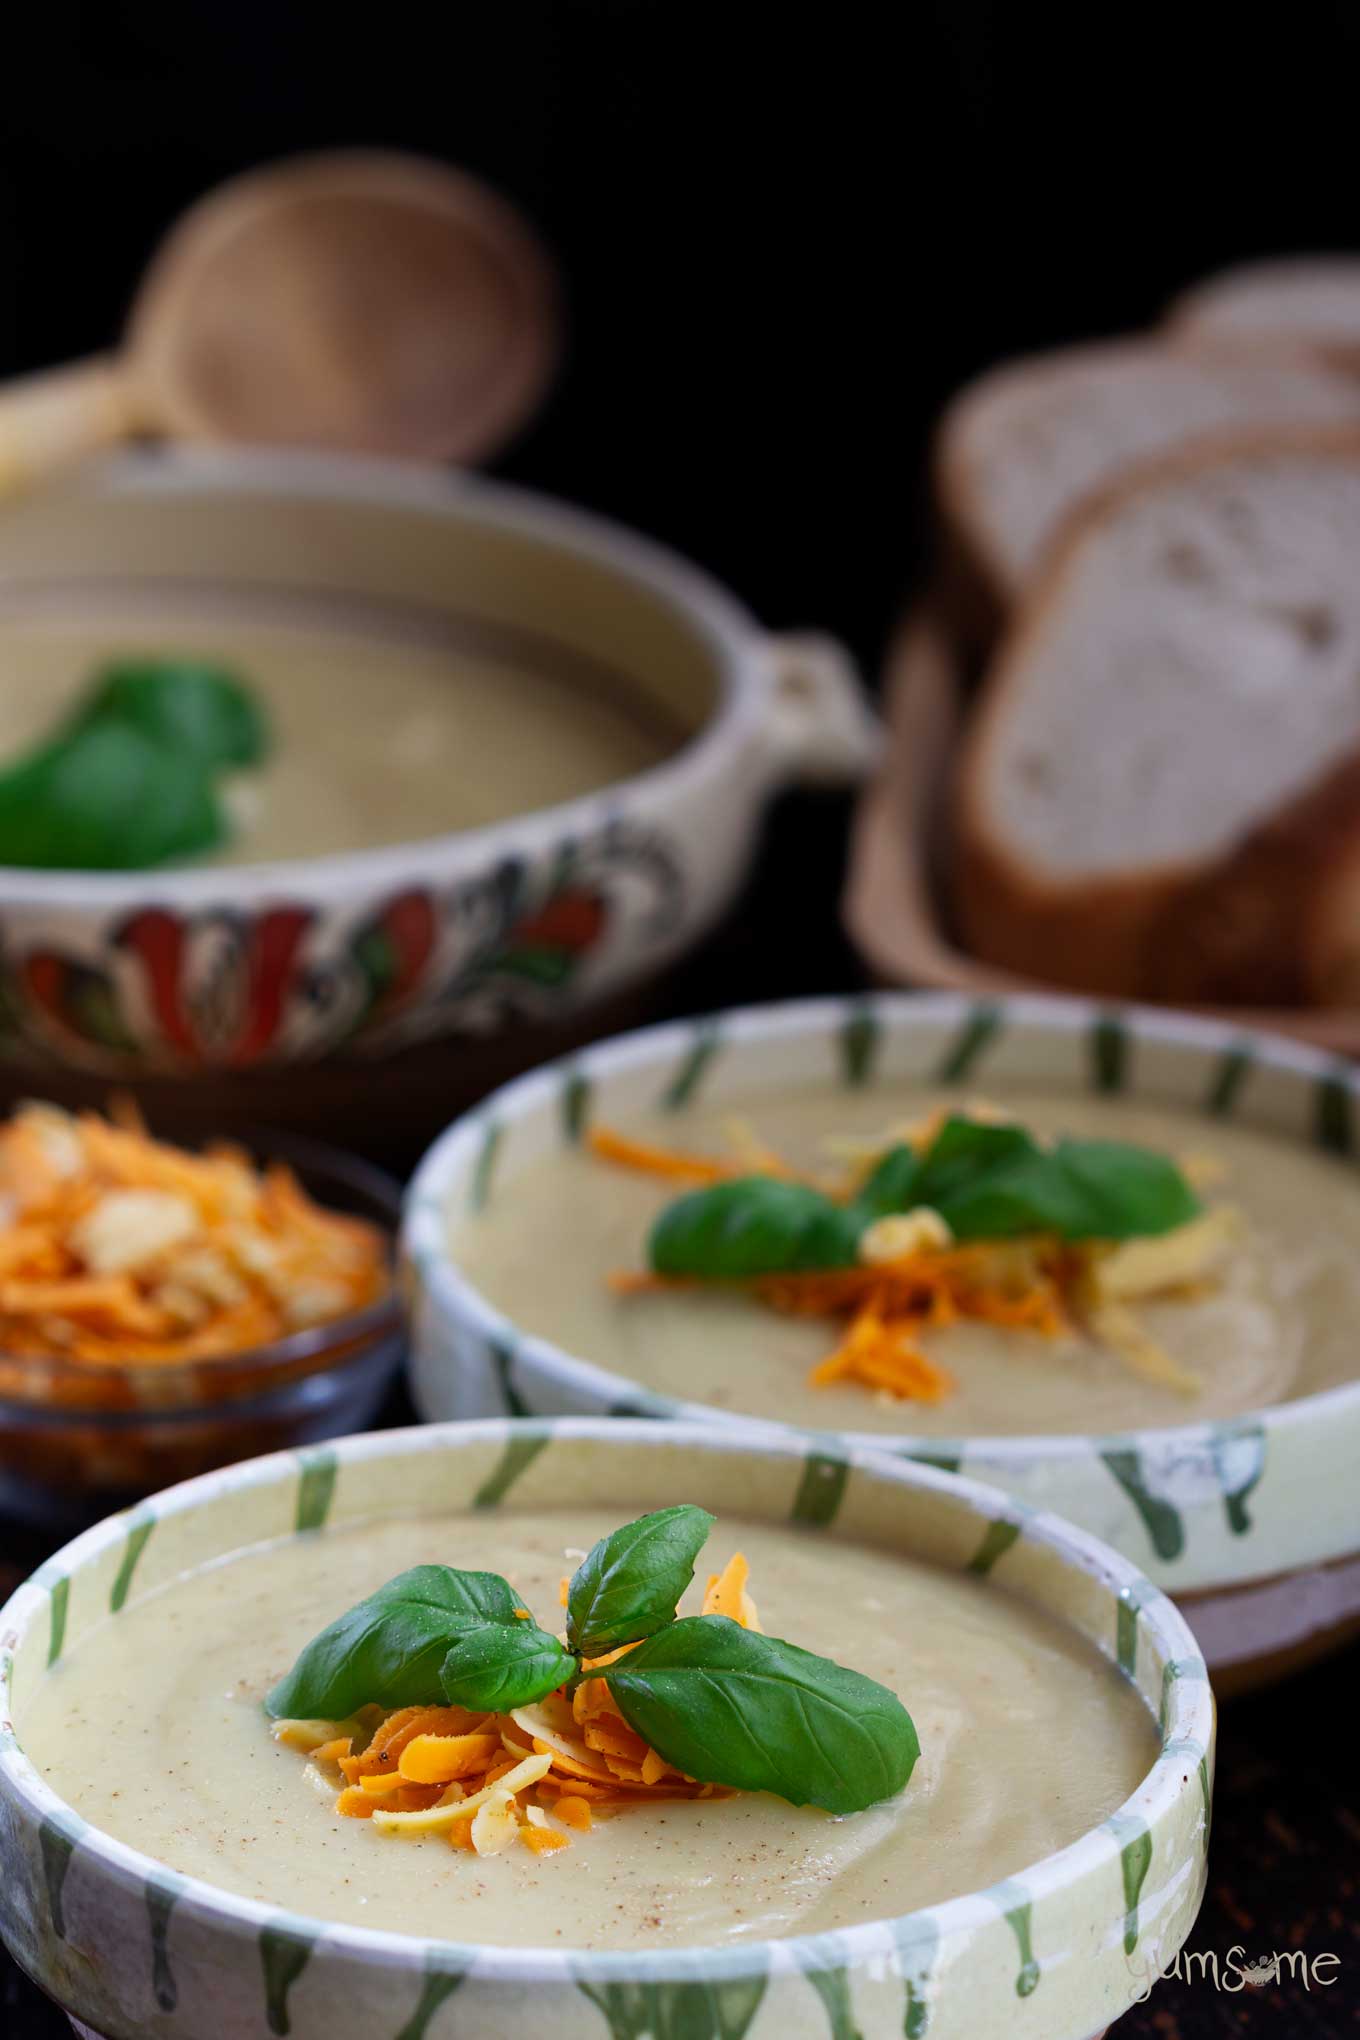 Several bowls of vegan cauliflower cheese soup, garnished with grated cheese and basil, on a black table.